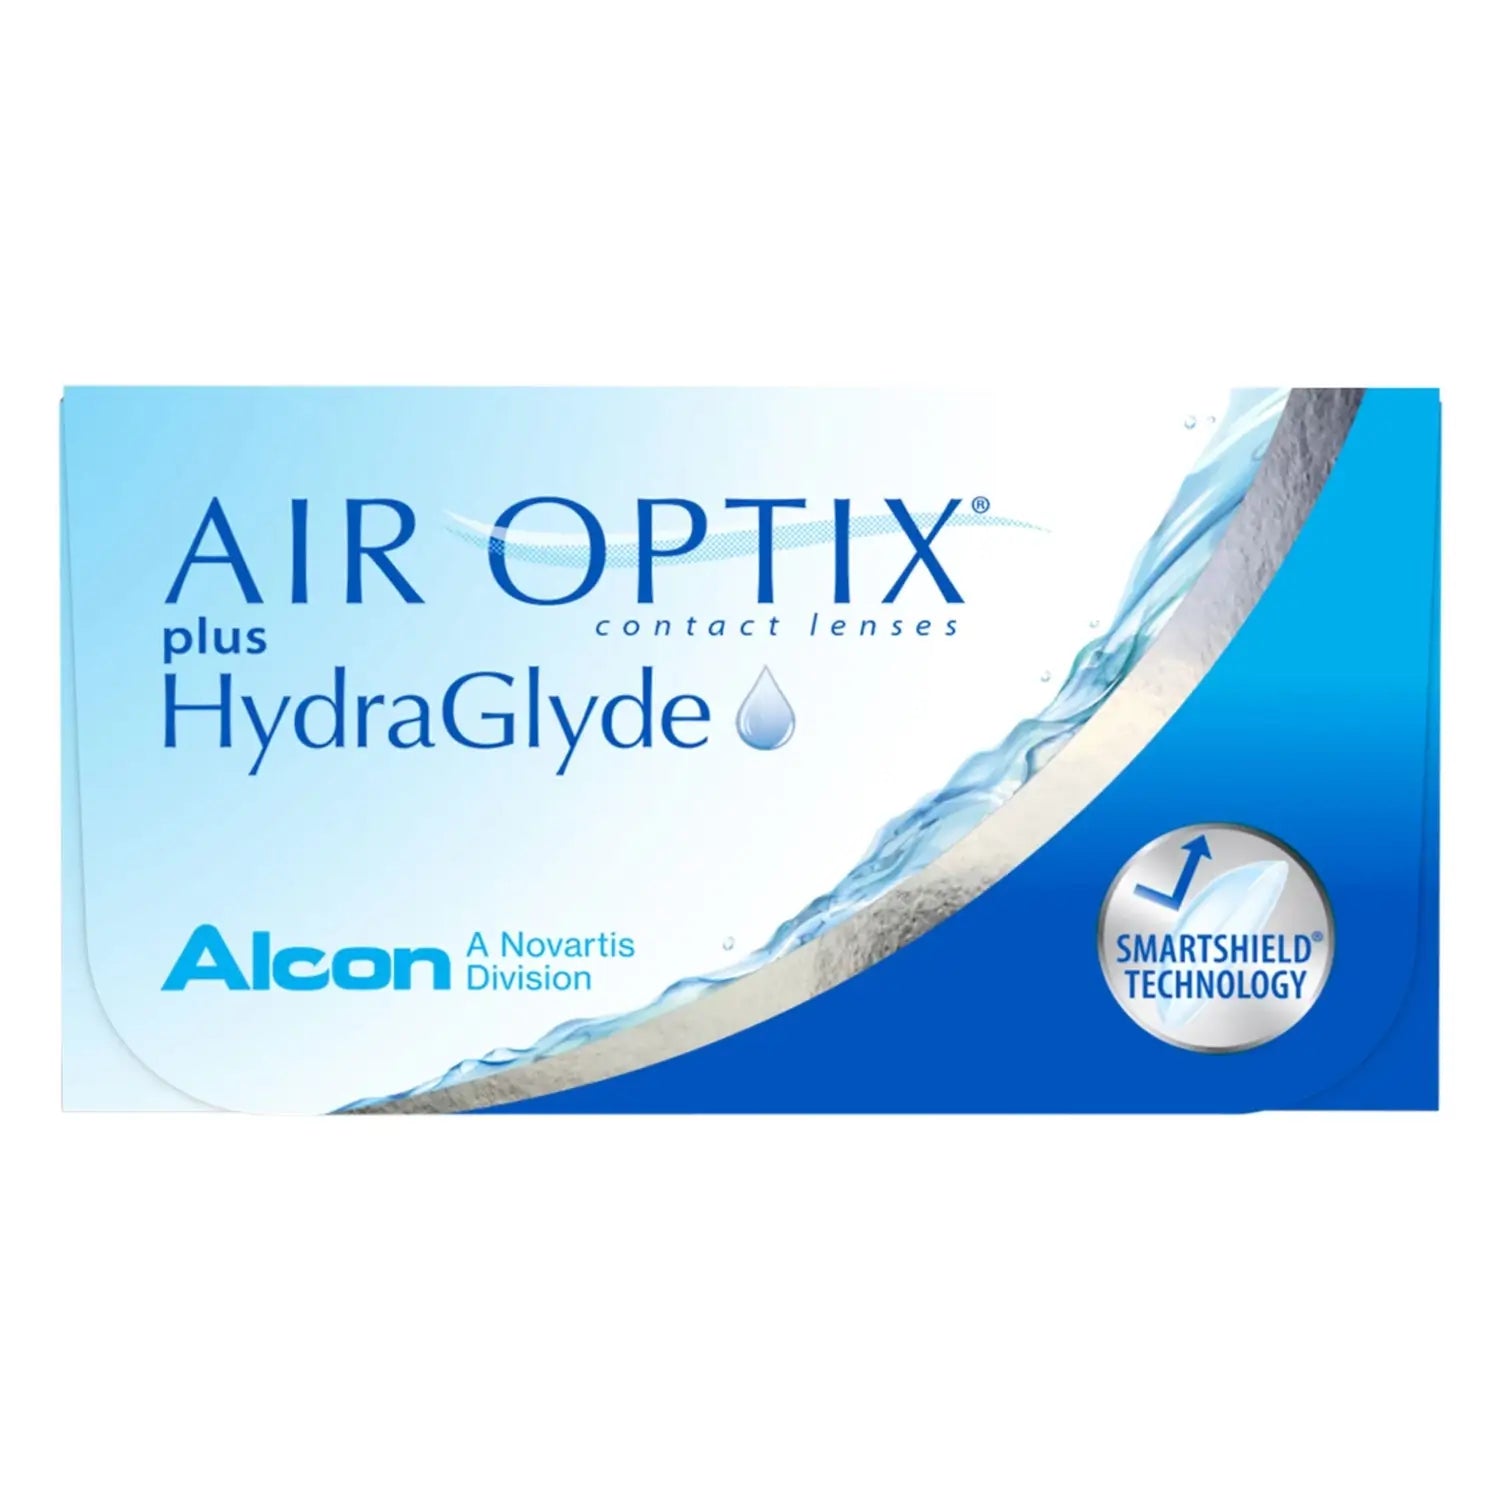 Certified Air Optix monthly Contact Lenses by Alcon on sale online at The Optical Co at the best prices